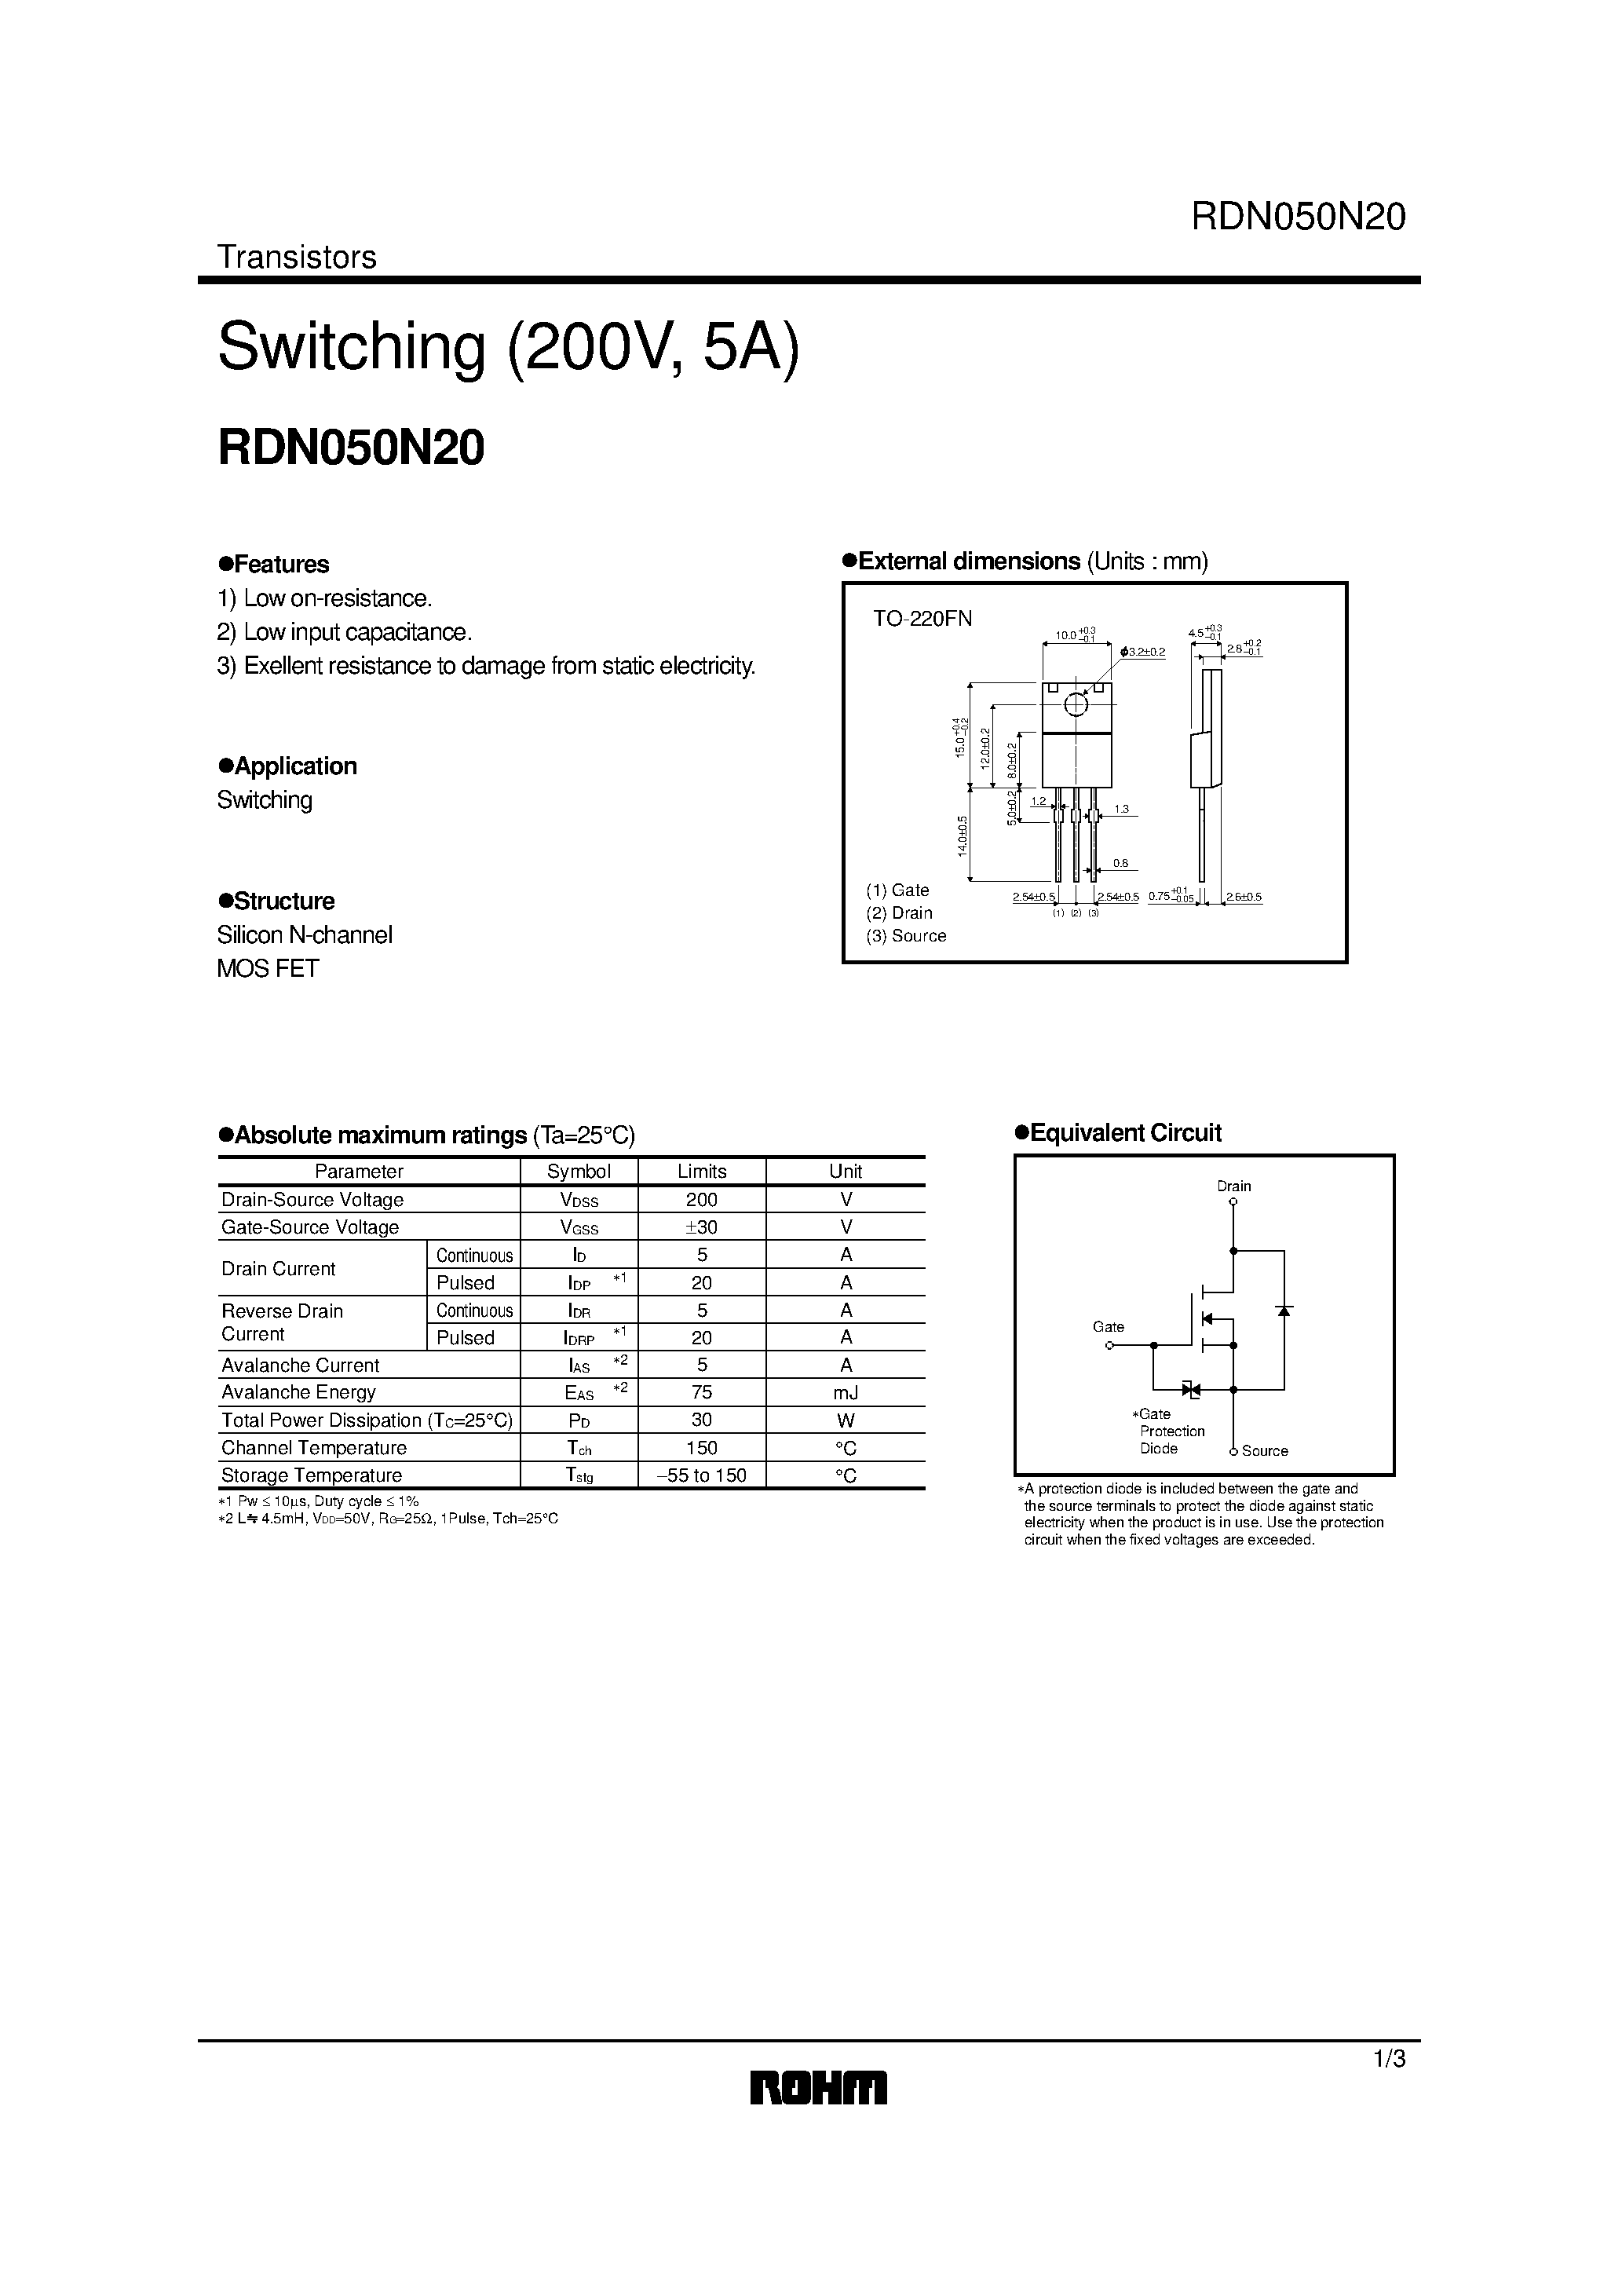 Datasheet RDN050N20 - Switching (200V/ 5A) page 1